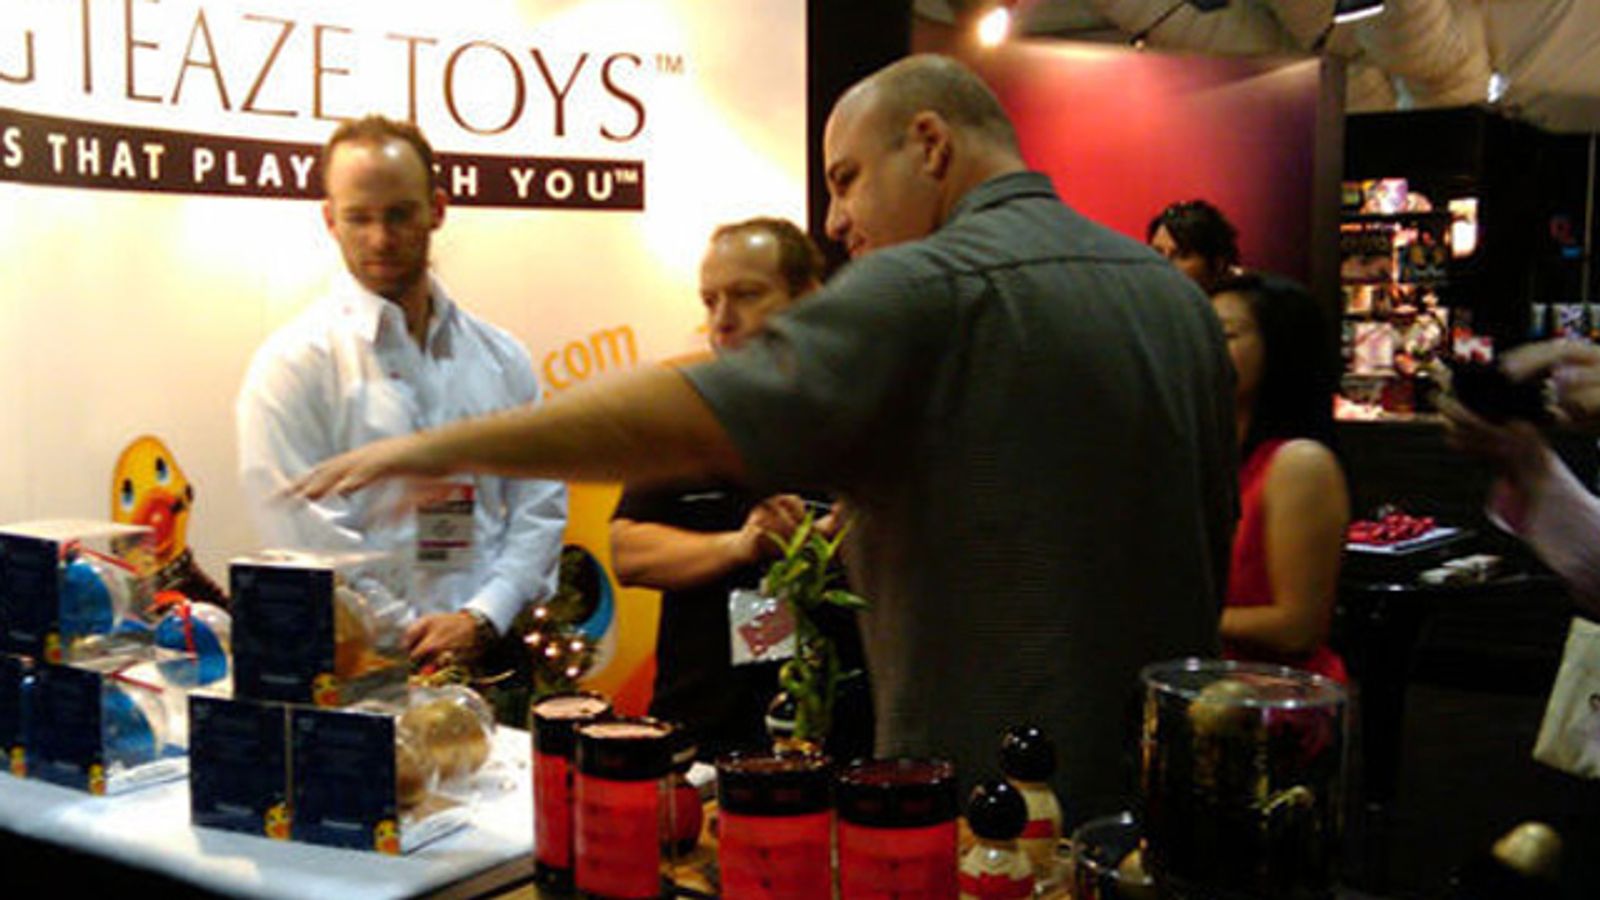 AVN Novelty Expo 2009 Sees Successful Opening Day